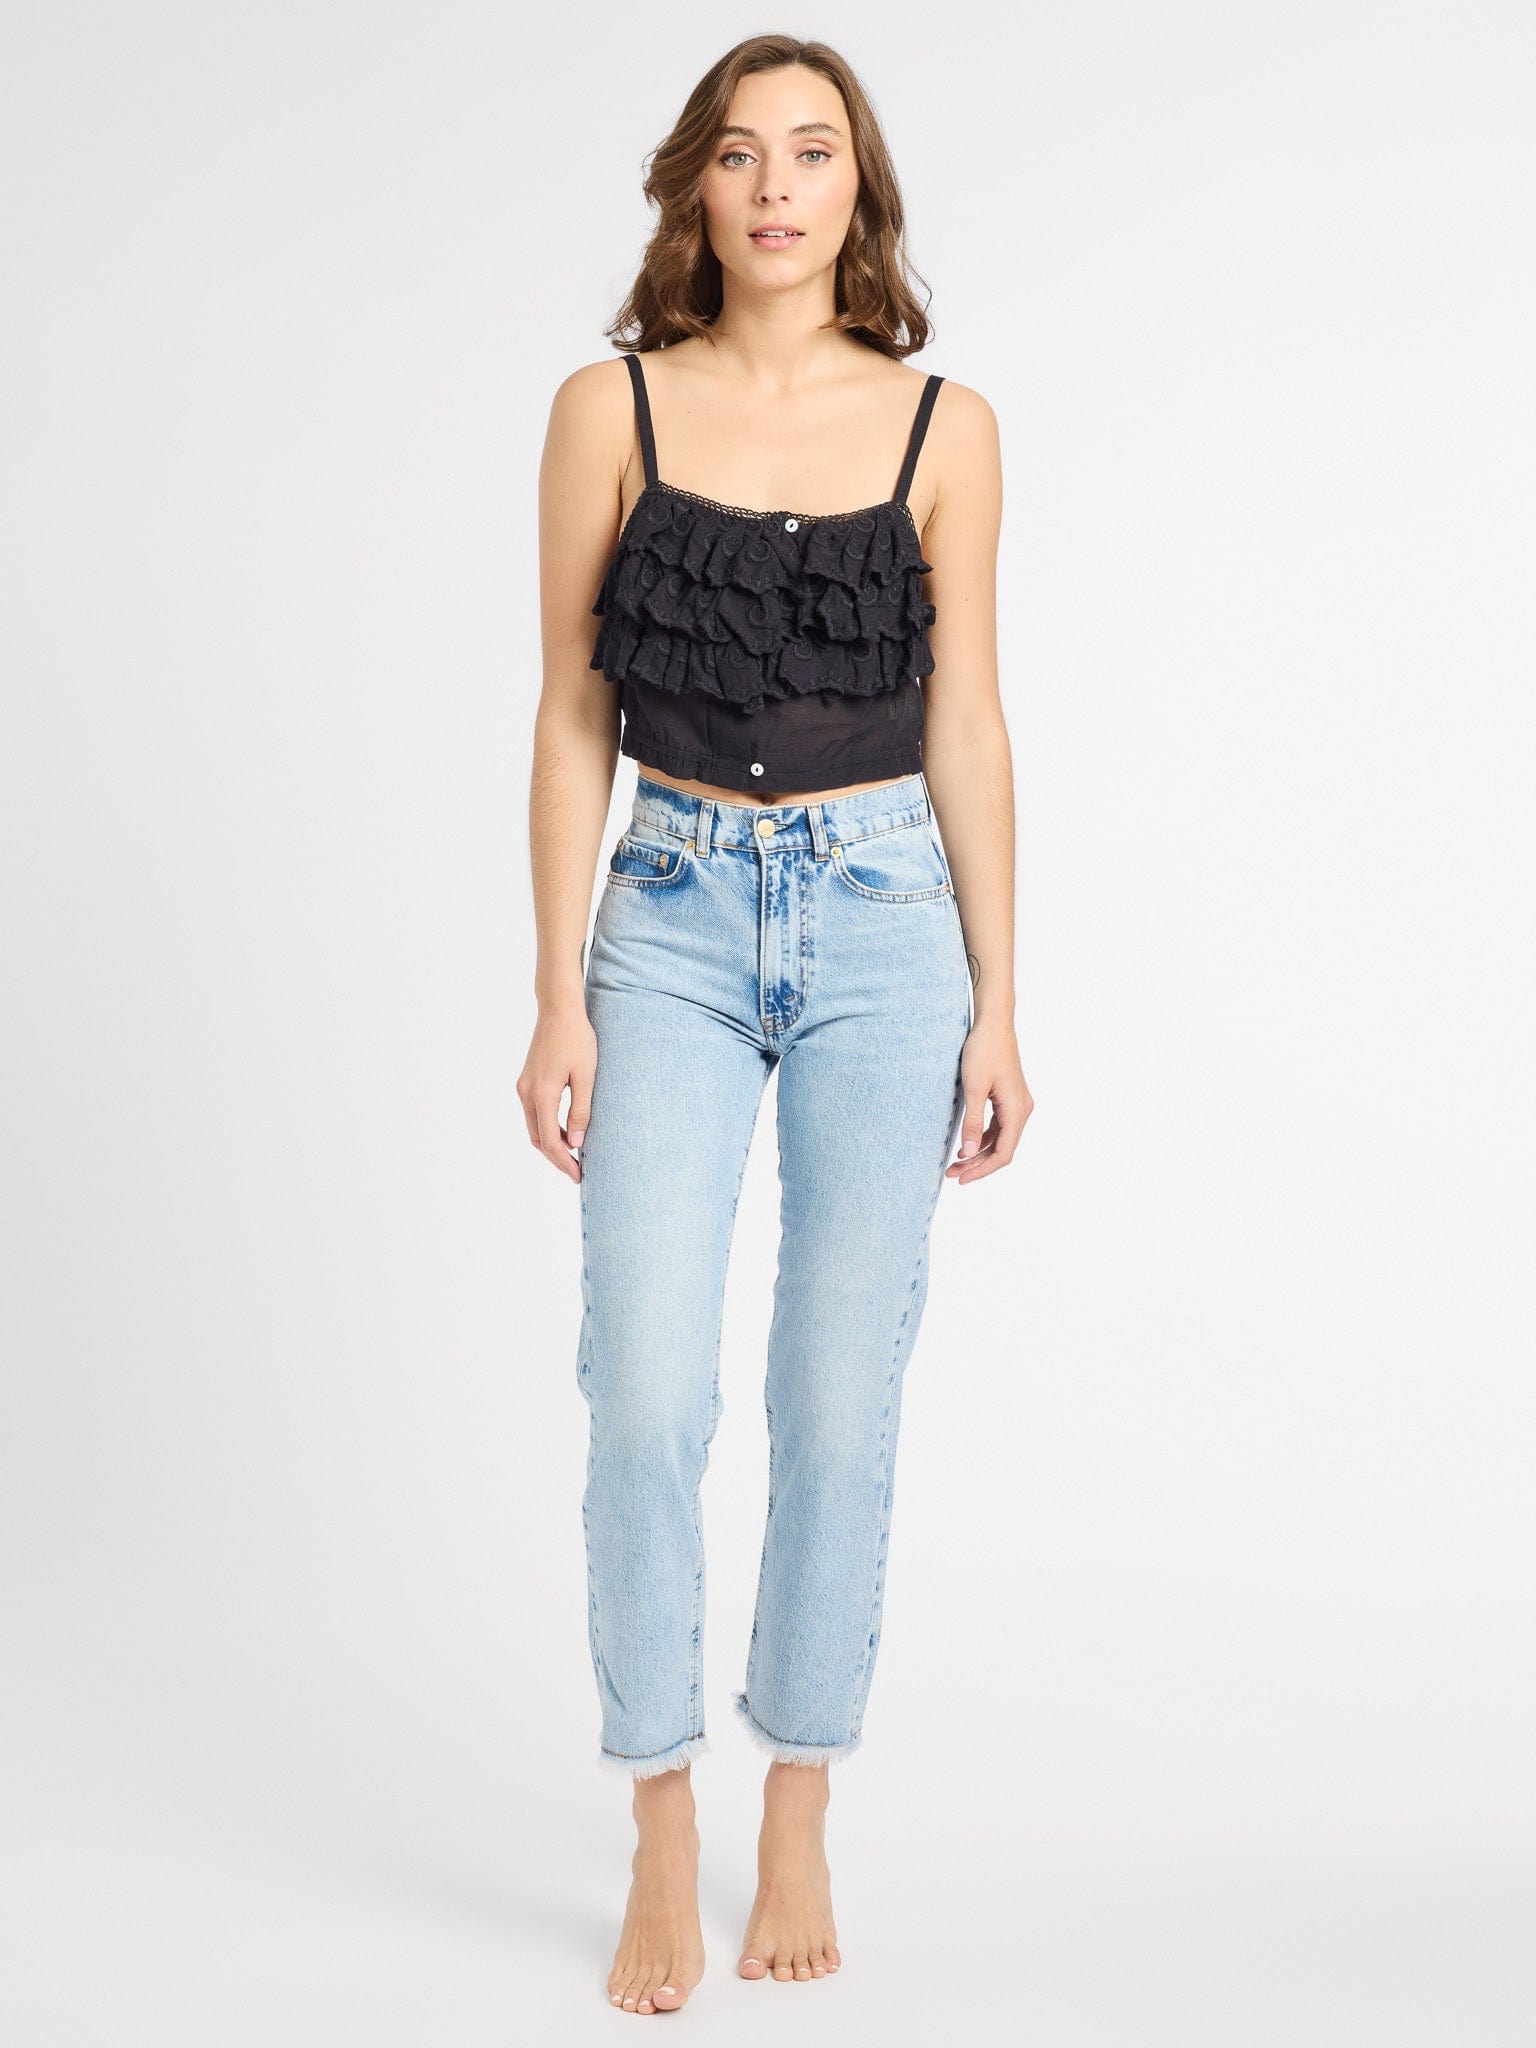 MILLE Clothing Patti Top in Black Petal Embroidery